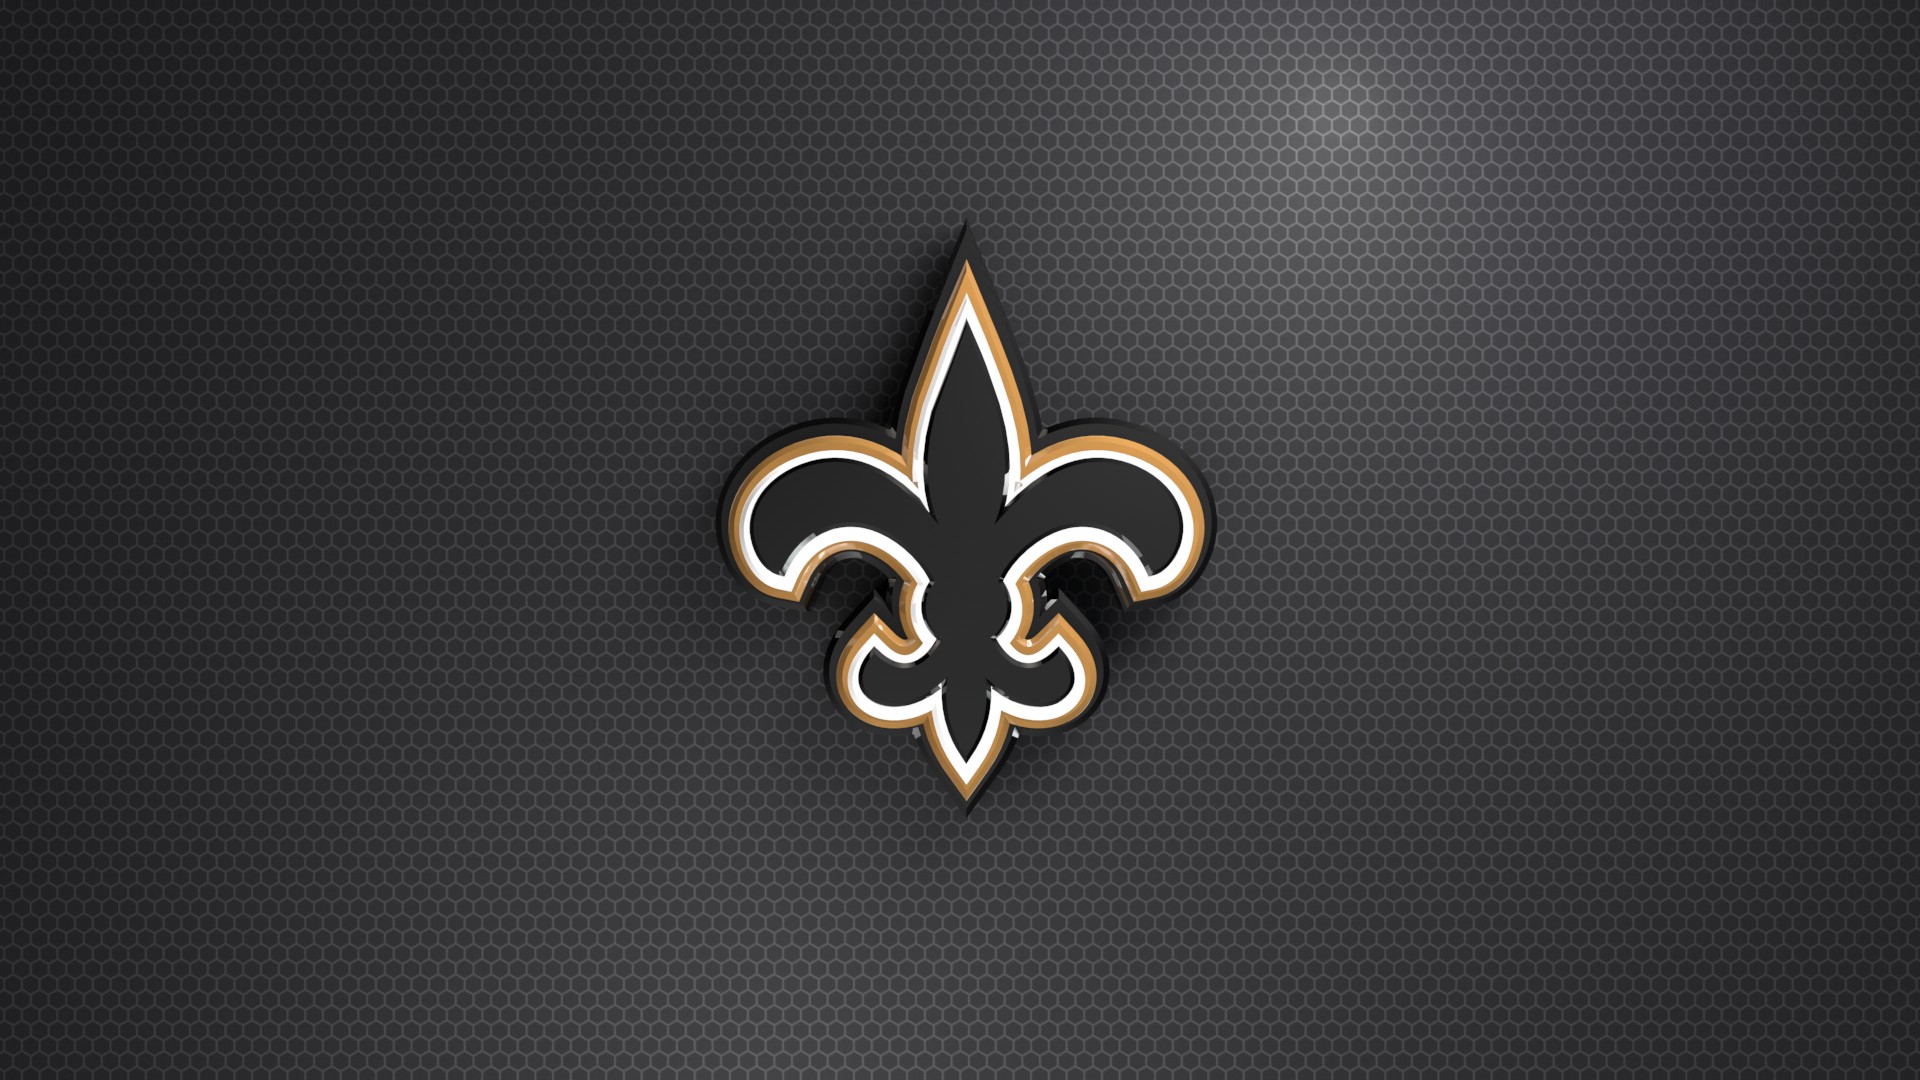 Wallpapers New Orleans Saints with resolution 1920x1080 pixel. You can make this wallpaper for your Mac or Windows Desktop Background, iPhone, Android or Tablet and another Smartphone device